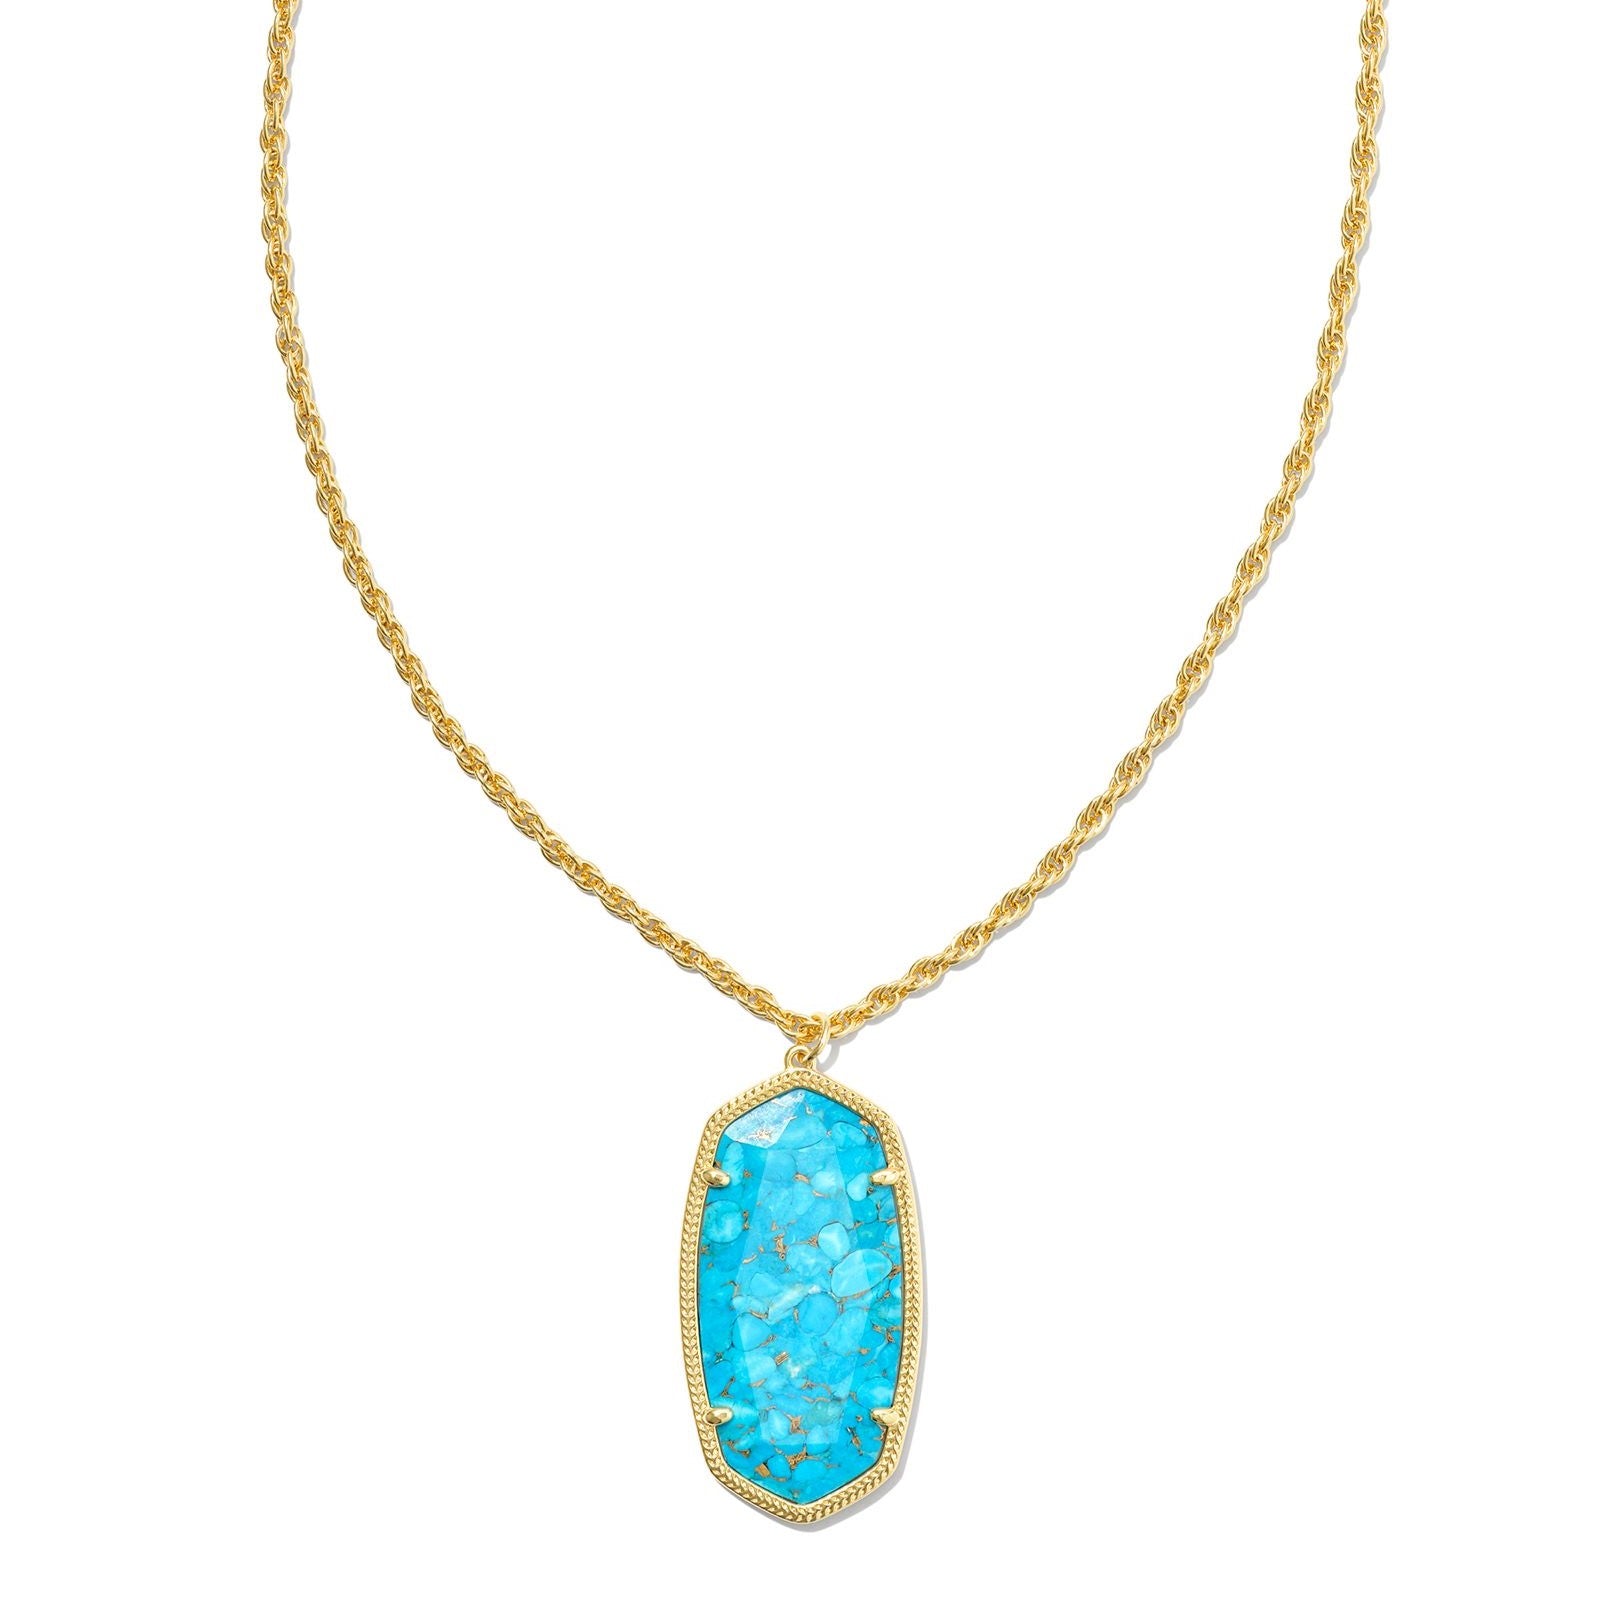 Kendra Scott | Rae Gold Long Pendant Necklace in Bronze Veined Turquoise Magnesite - Giddy Up Glamour Boutique